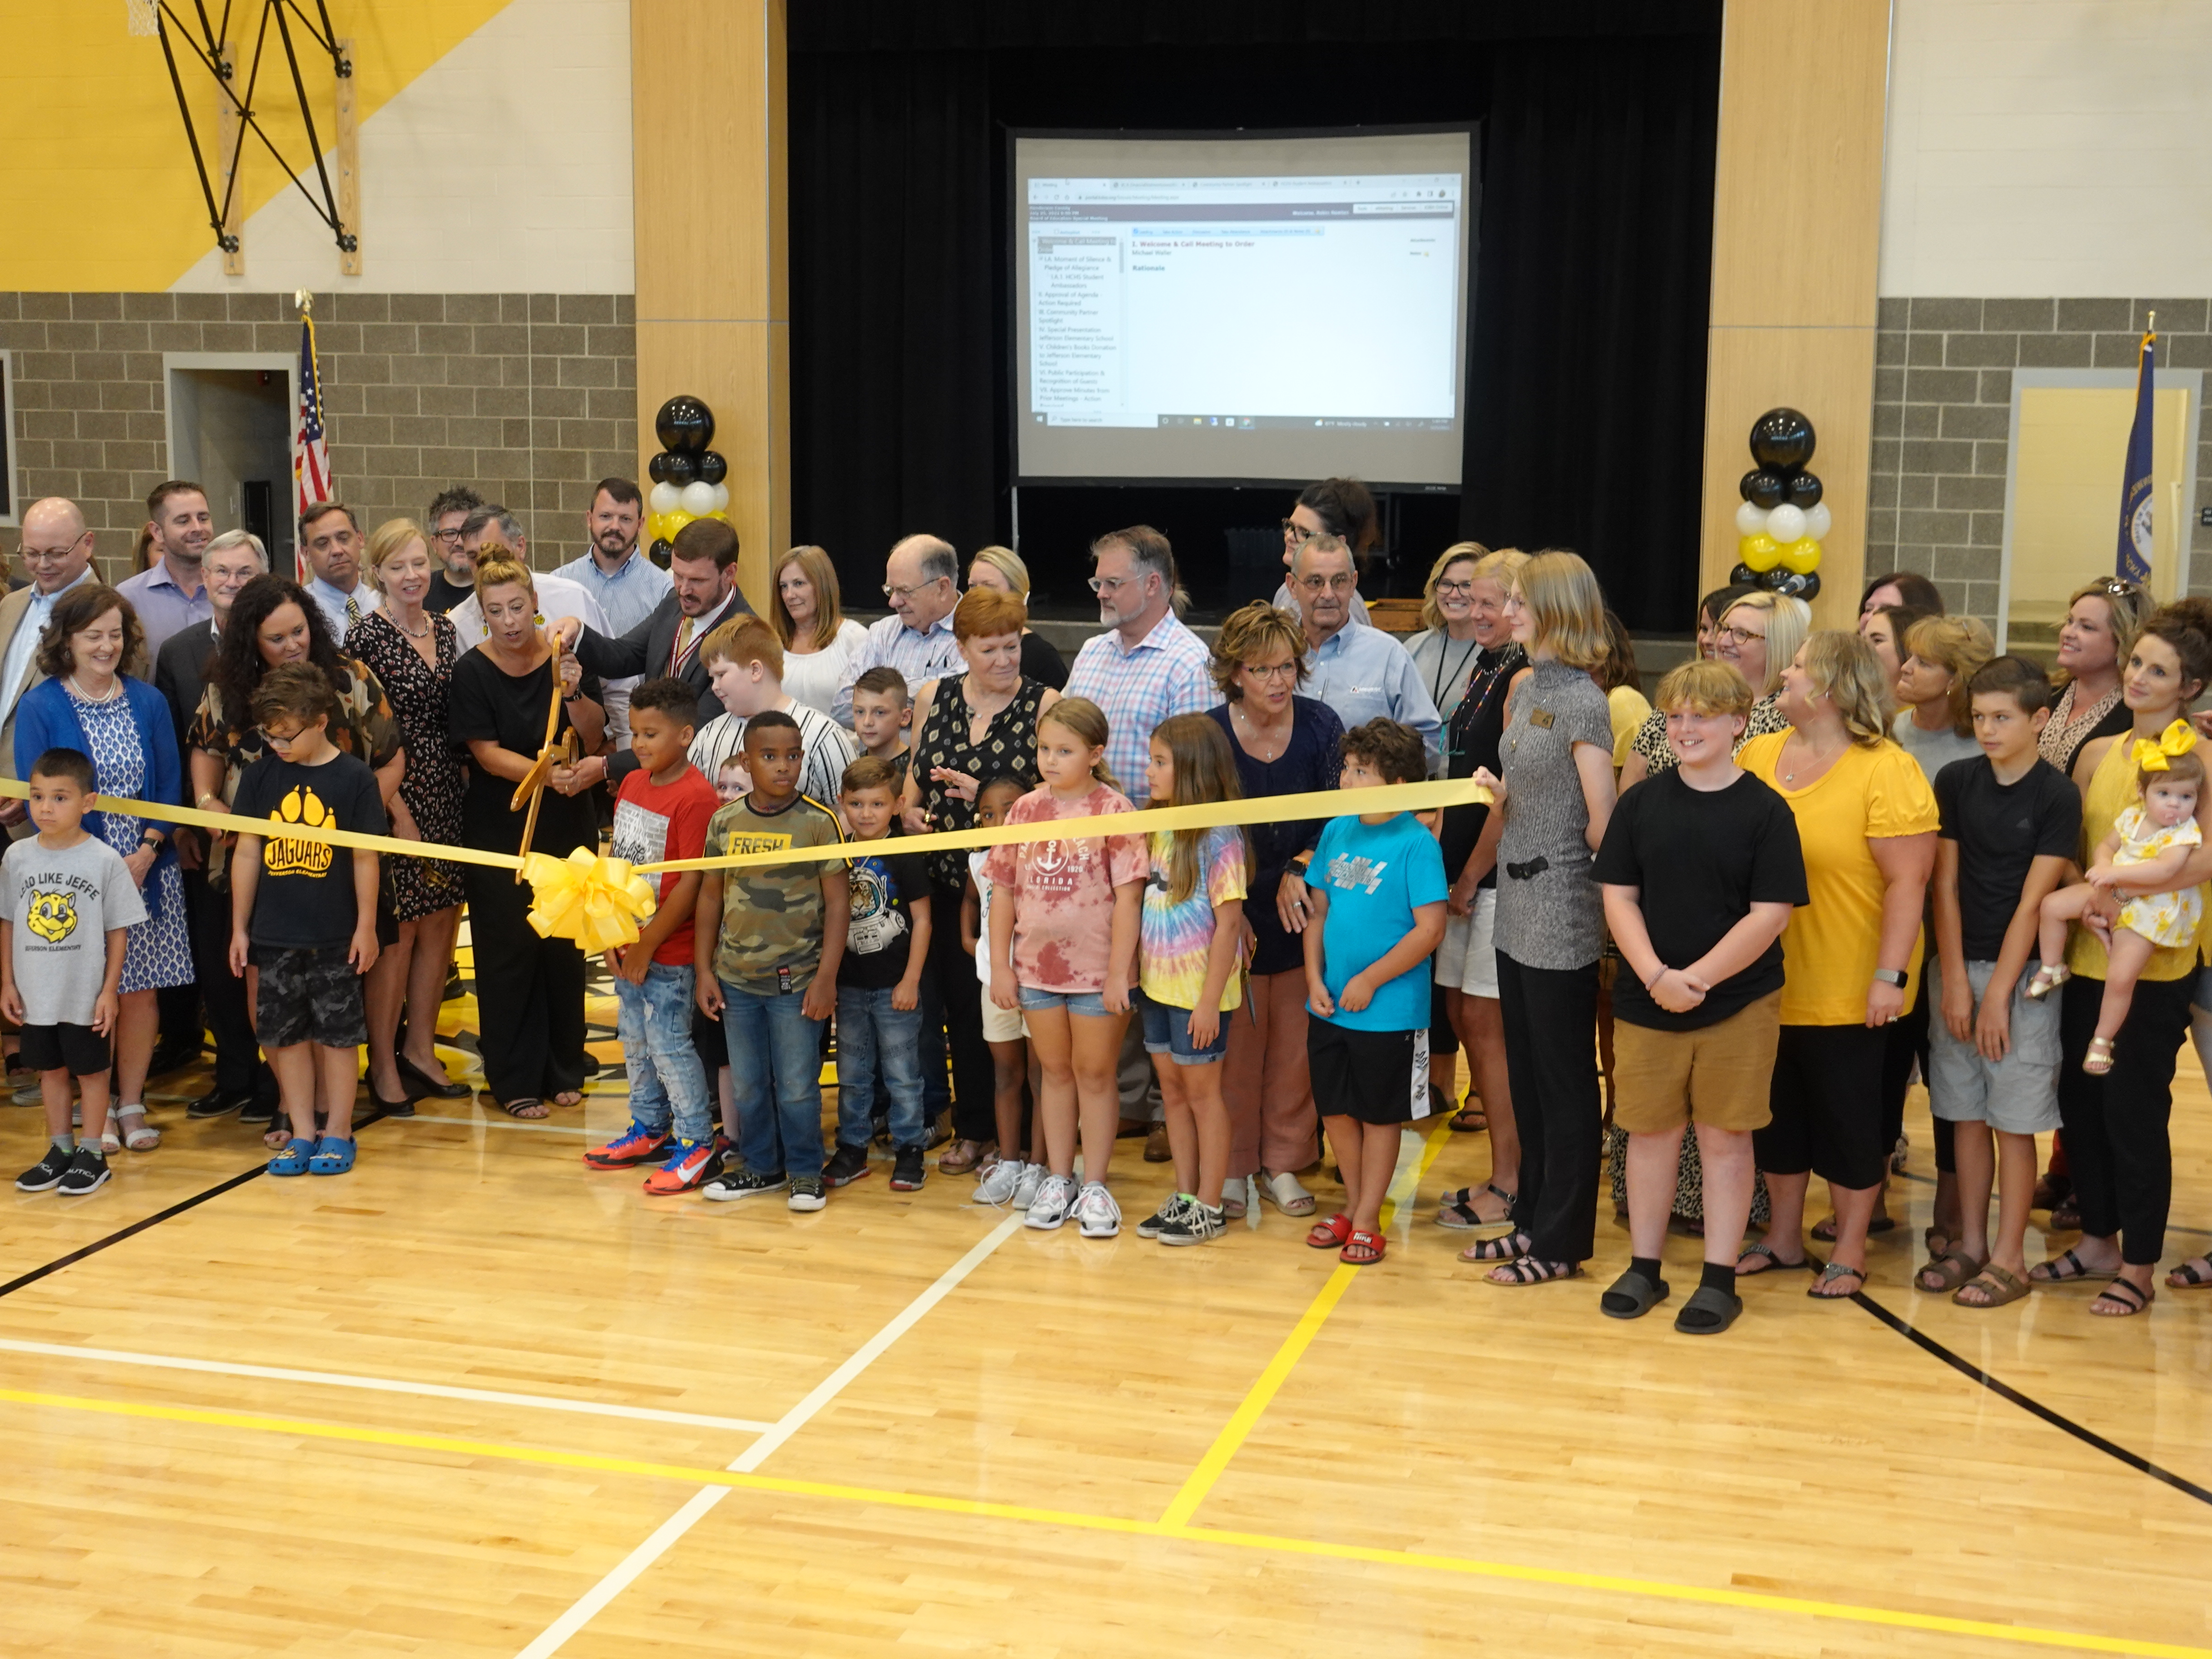 Ribbon Cutting for the new Jefferson Elementary School